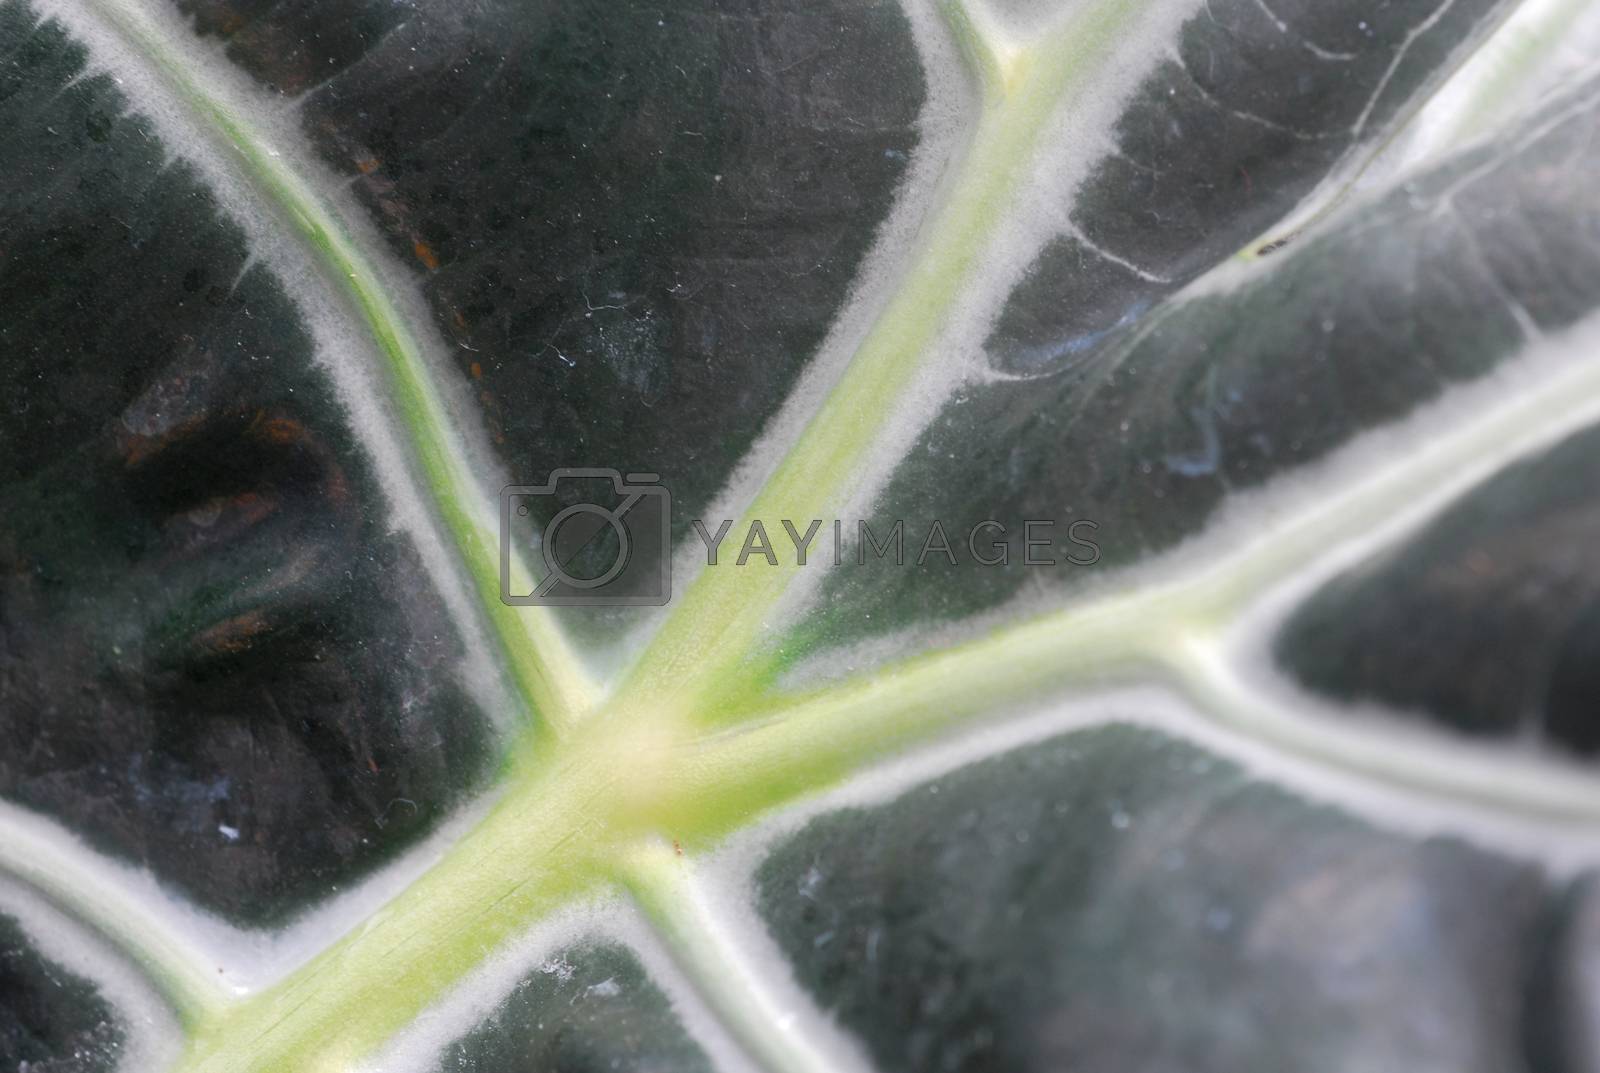 Royalty free image of Green alocasia Plant Leaves by nikonite